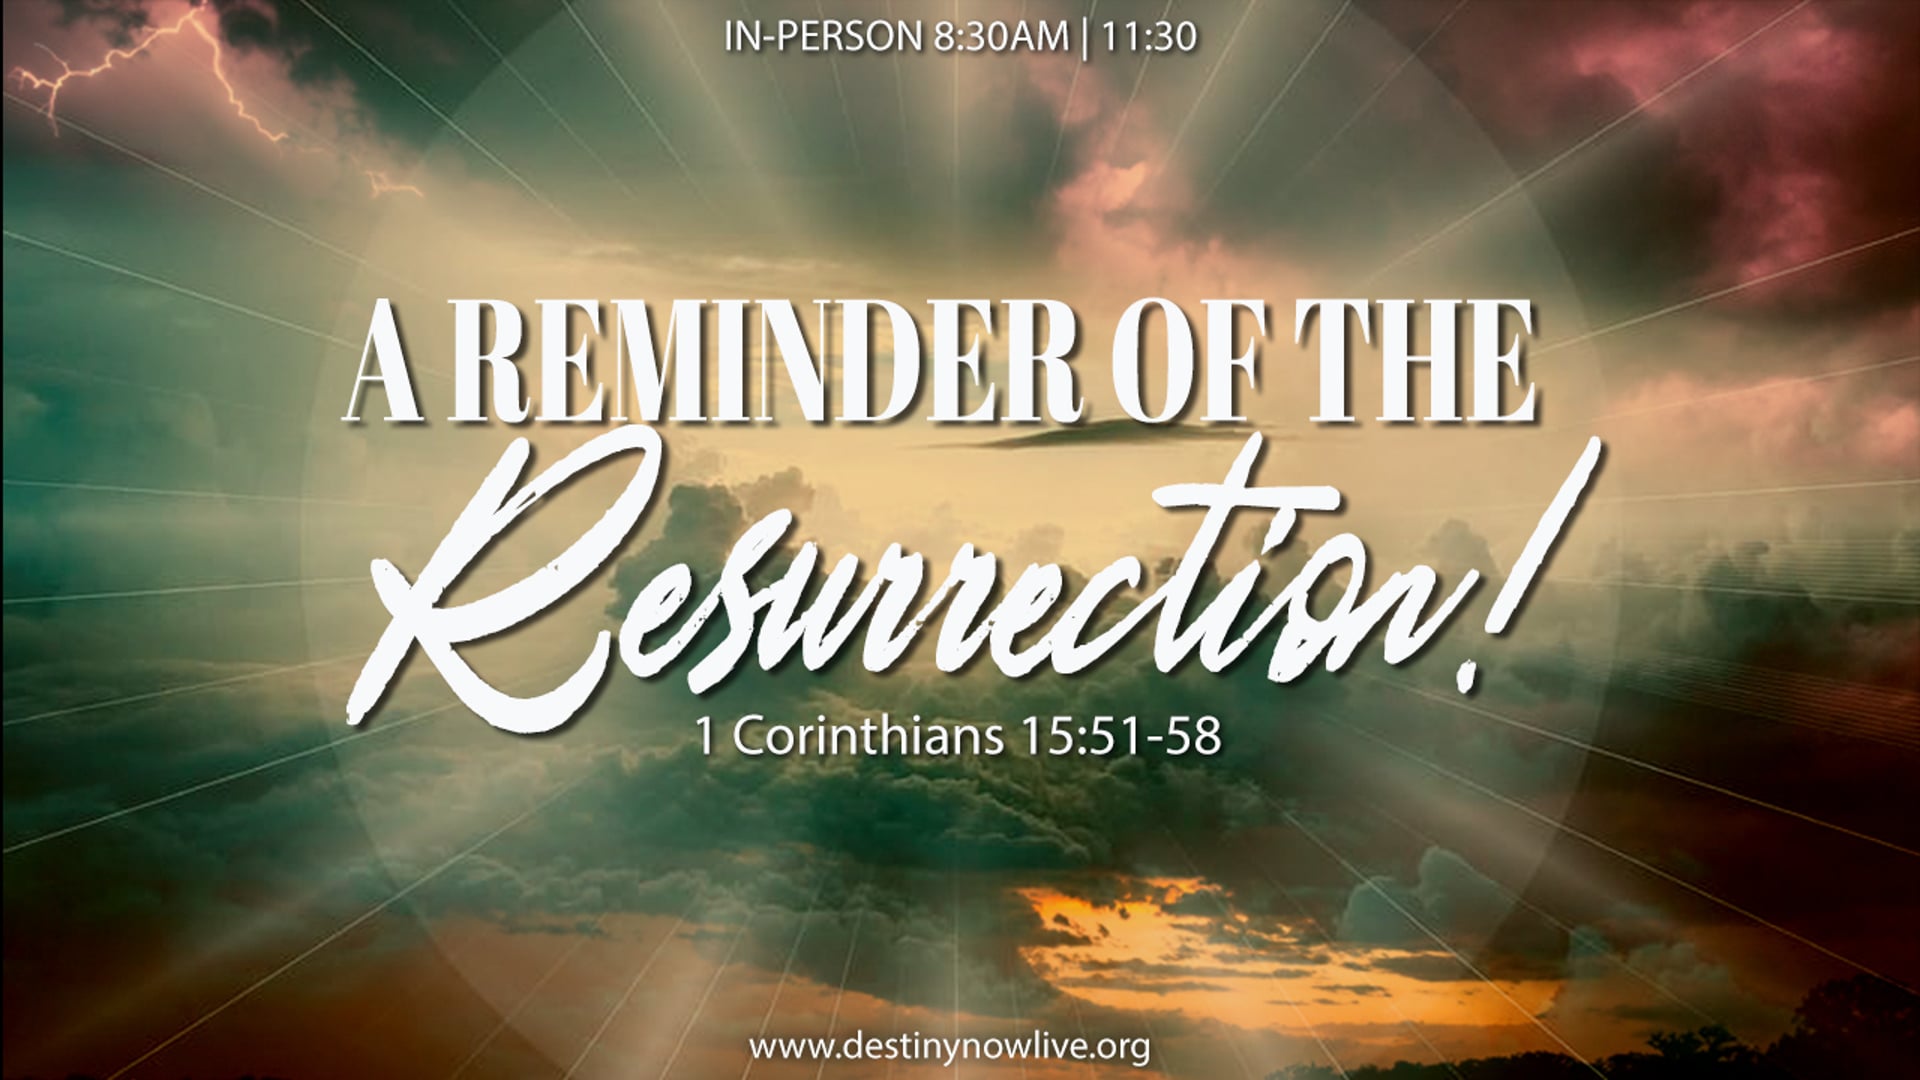 "A Reminder Of The Resurrection" - Text to Give - 910-460-3377 - Give Online @ www.destinynow.org